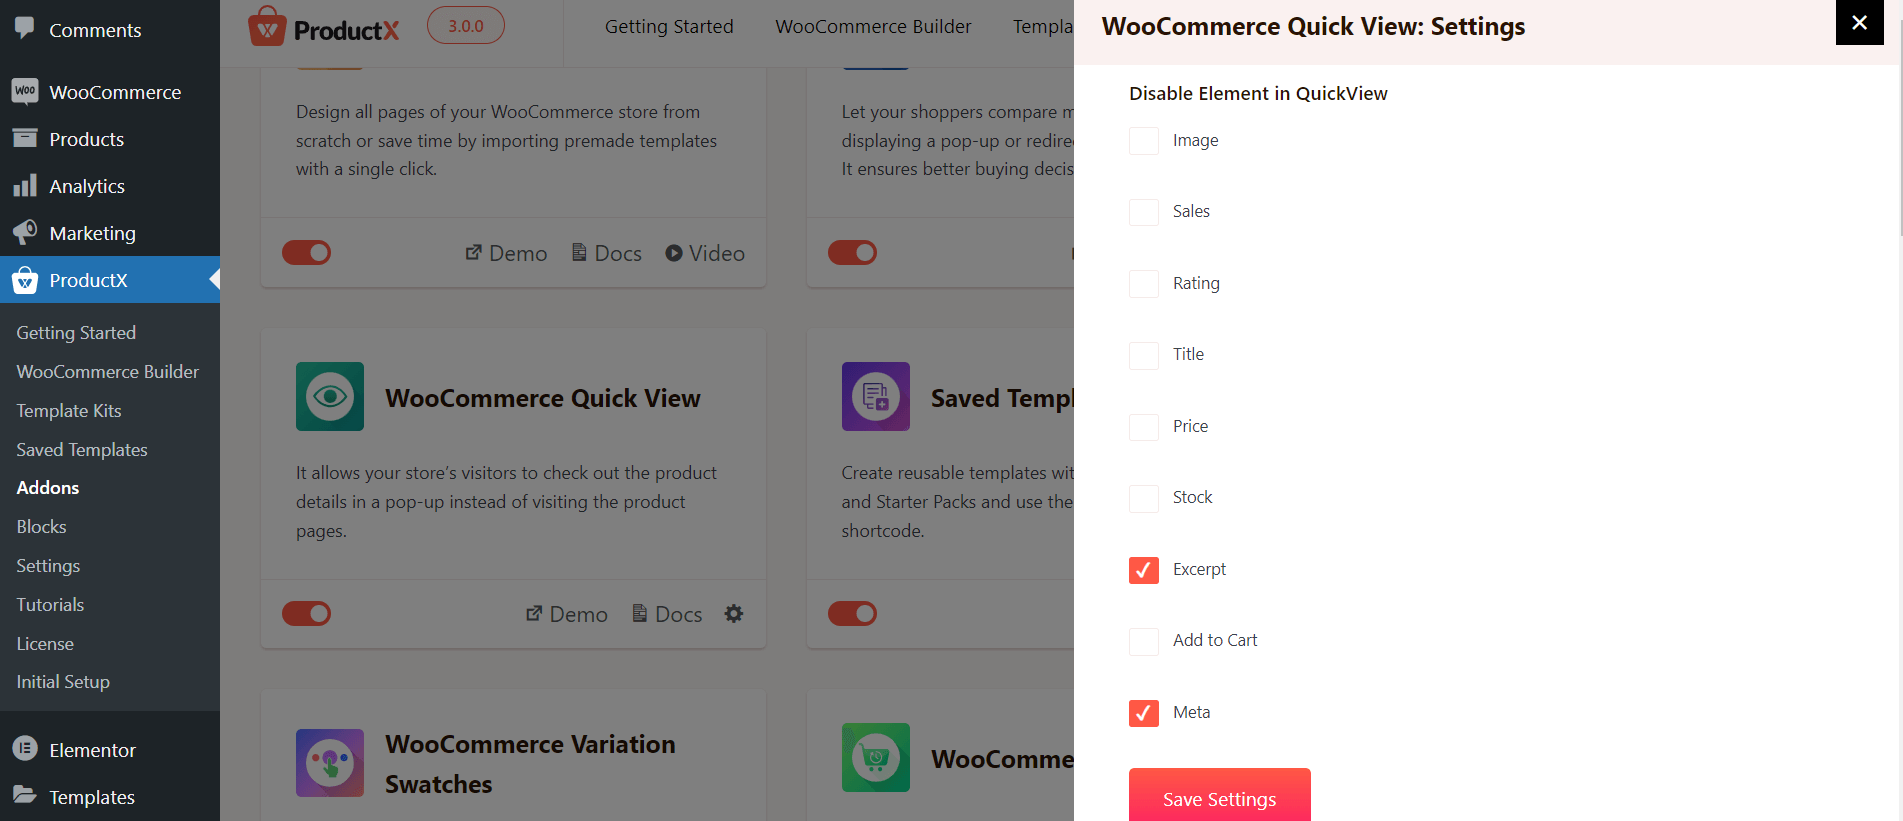 Disable Elements in Quickview